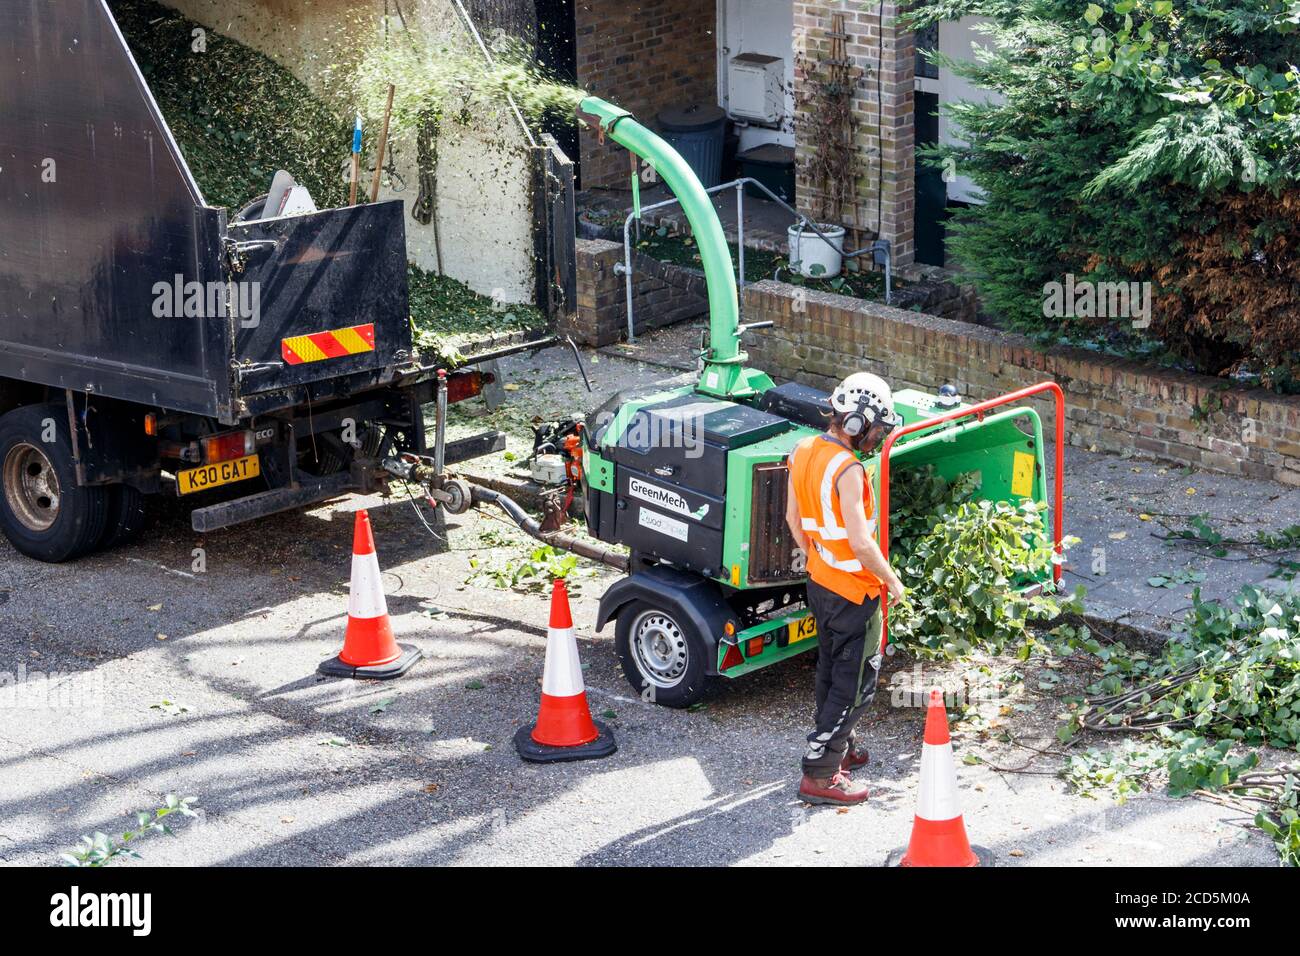 An arboriculturist in protective clothing gathering up cut branches and feeding them into a wood chipper, London, UK Stock Photo